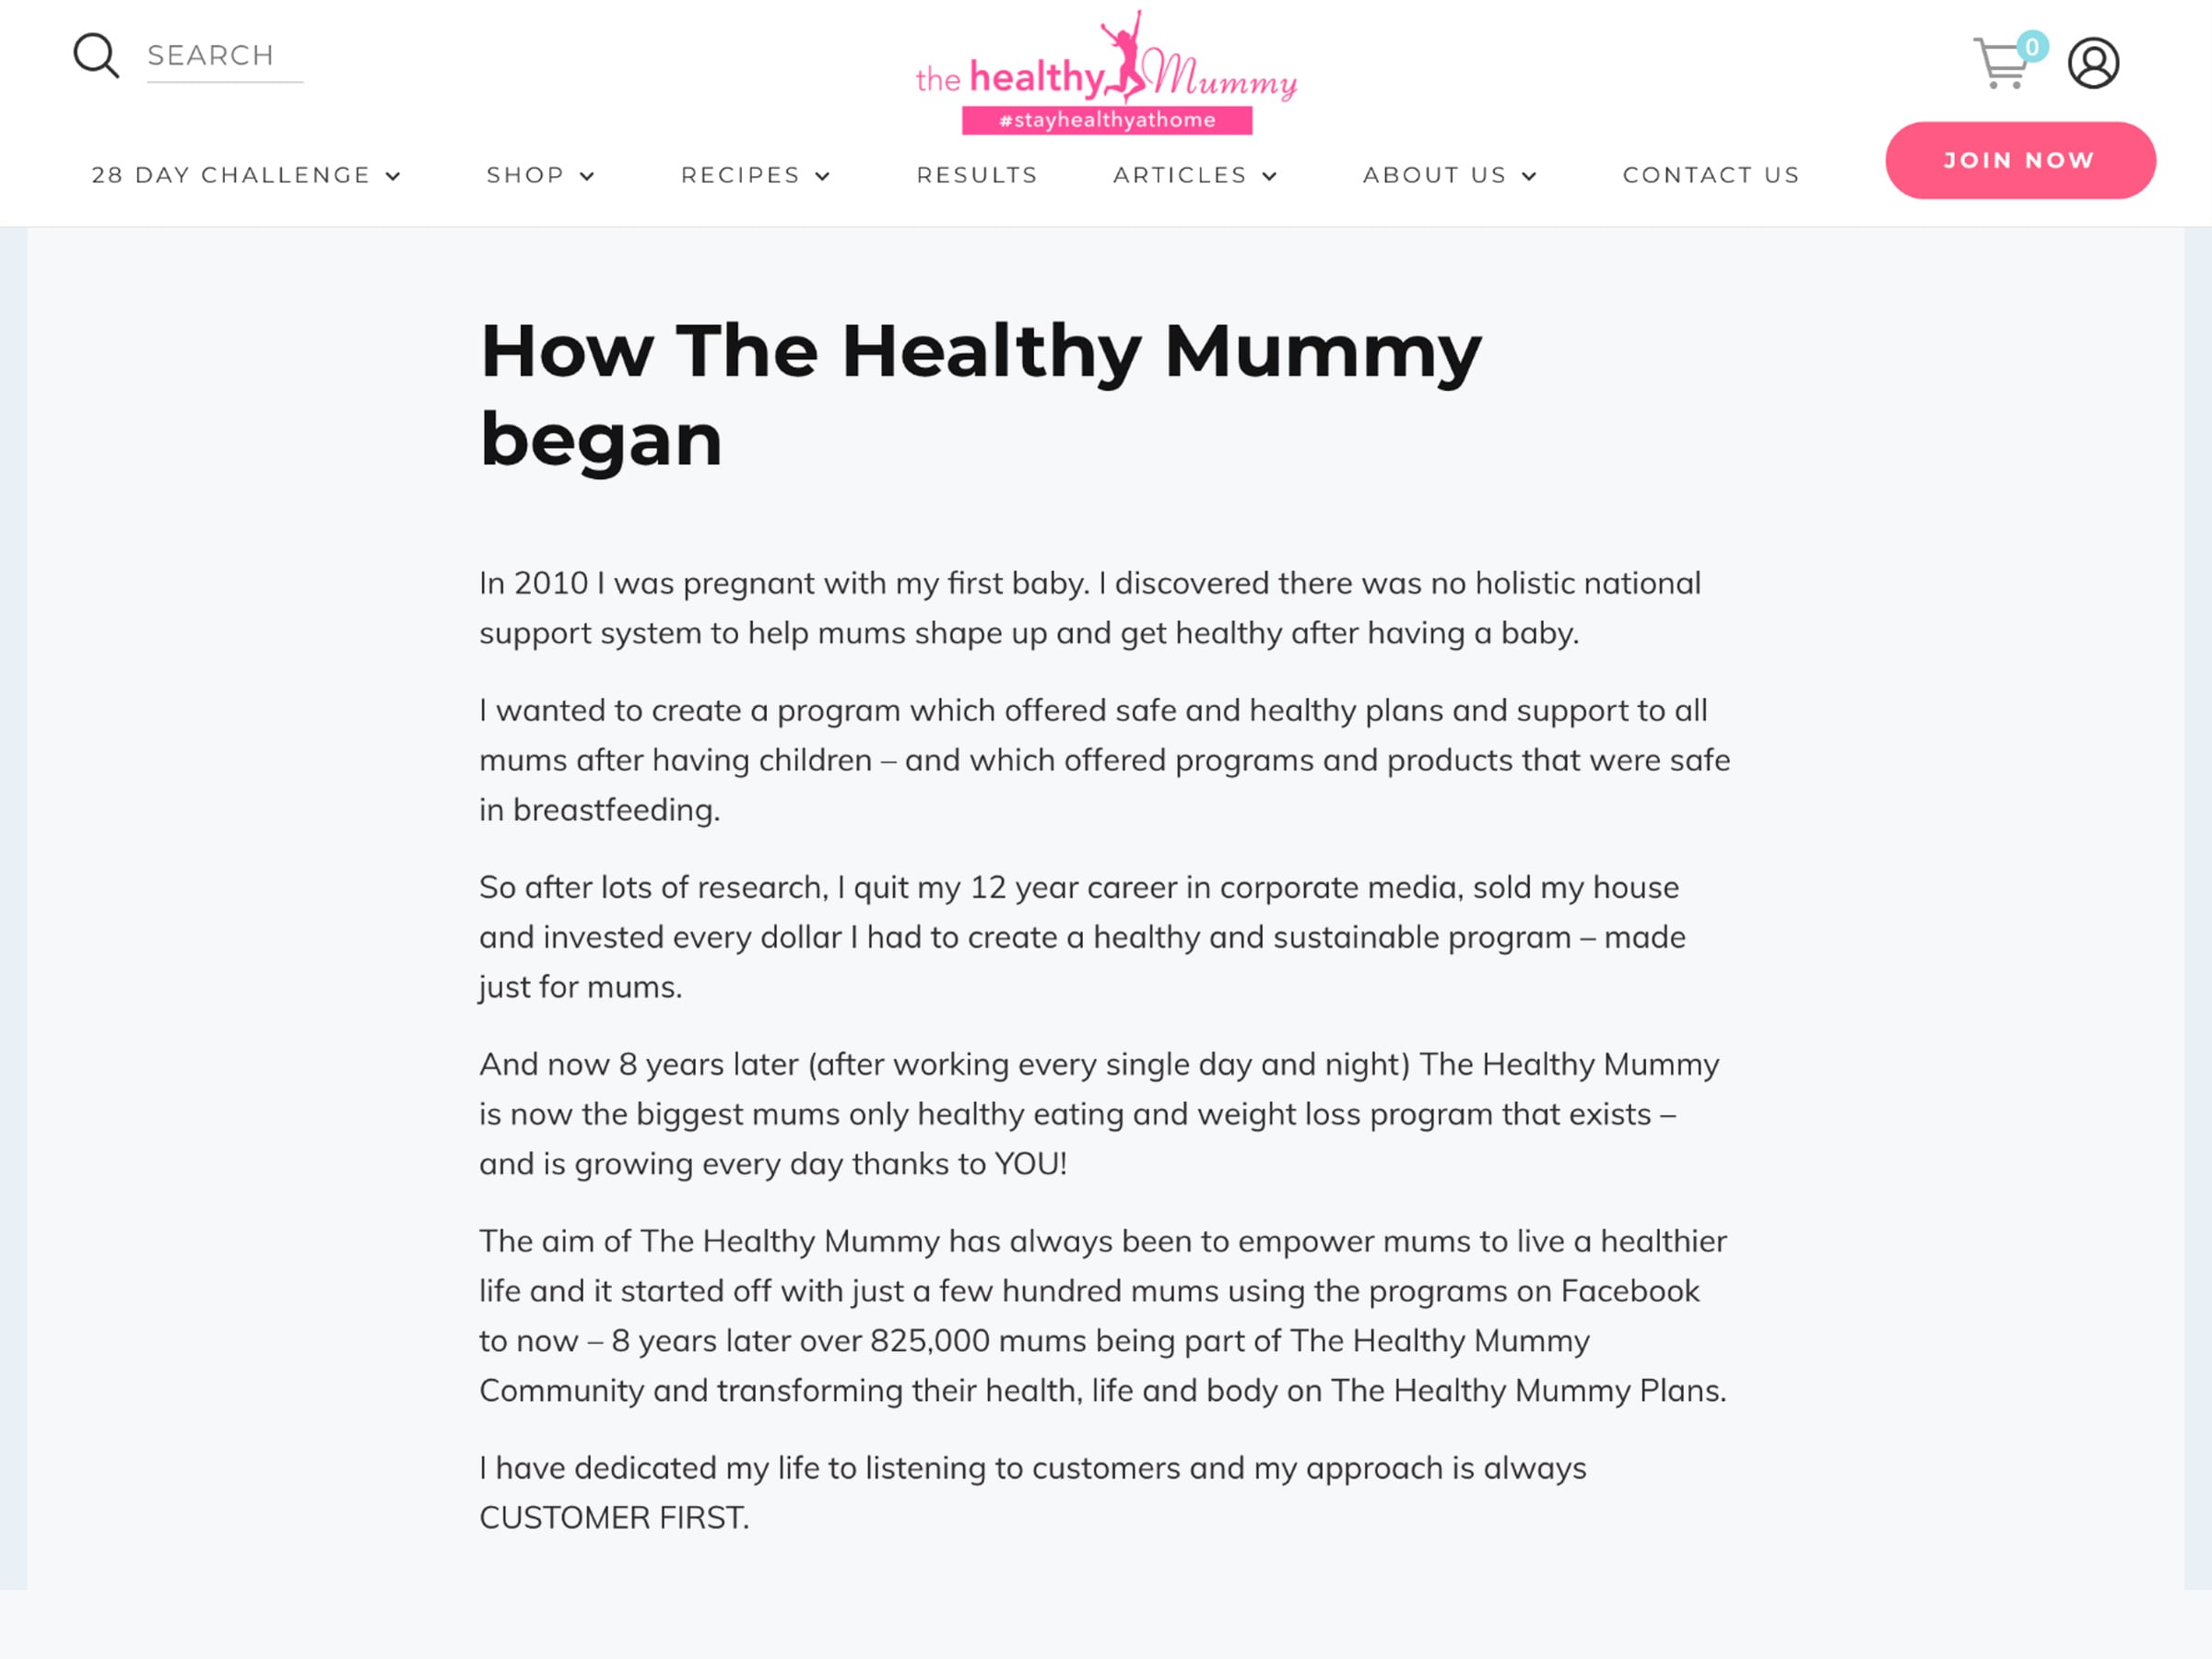 Healthy Mummy About Us page example